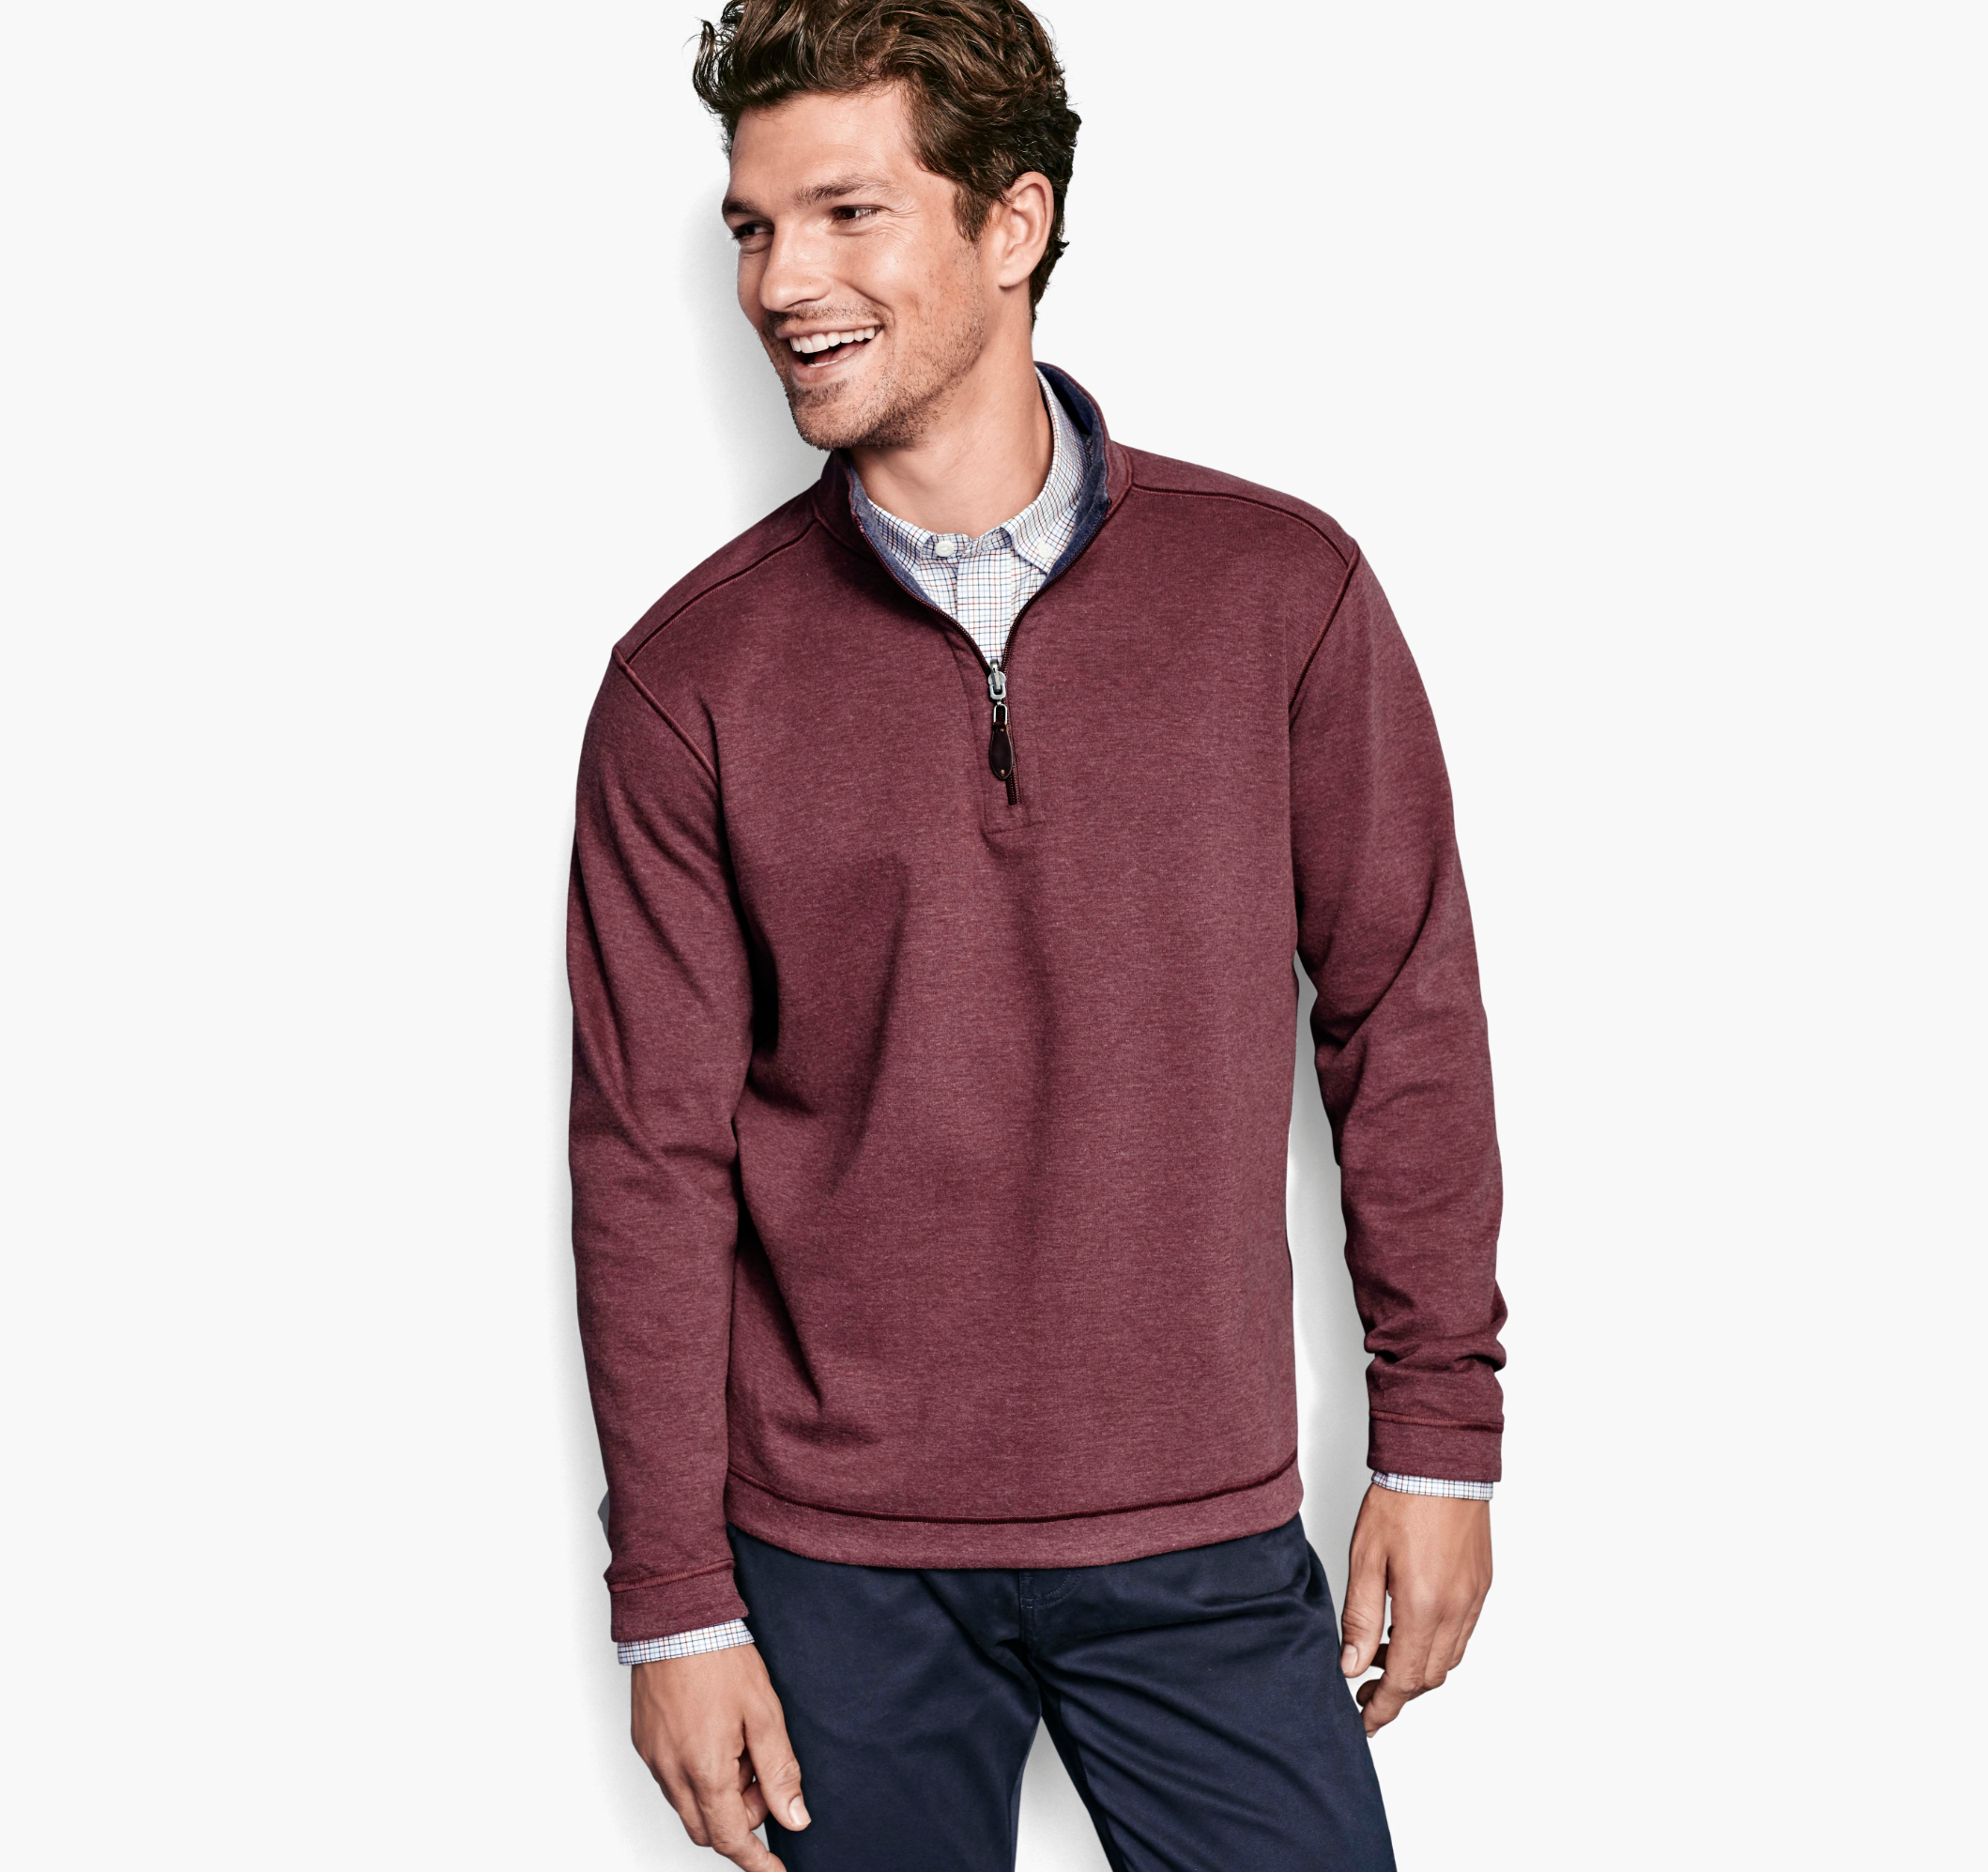 Stay warm and stylish in Johnston & Murphy's 1/4 Zip Fleece. With exceptional quality and a modern design, it'll fit right into your wardrobe while keeping you cozy.